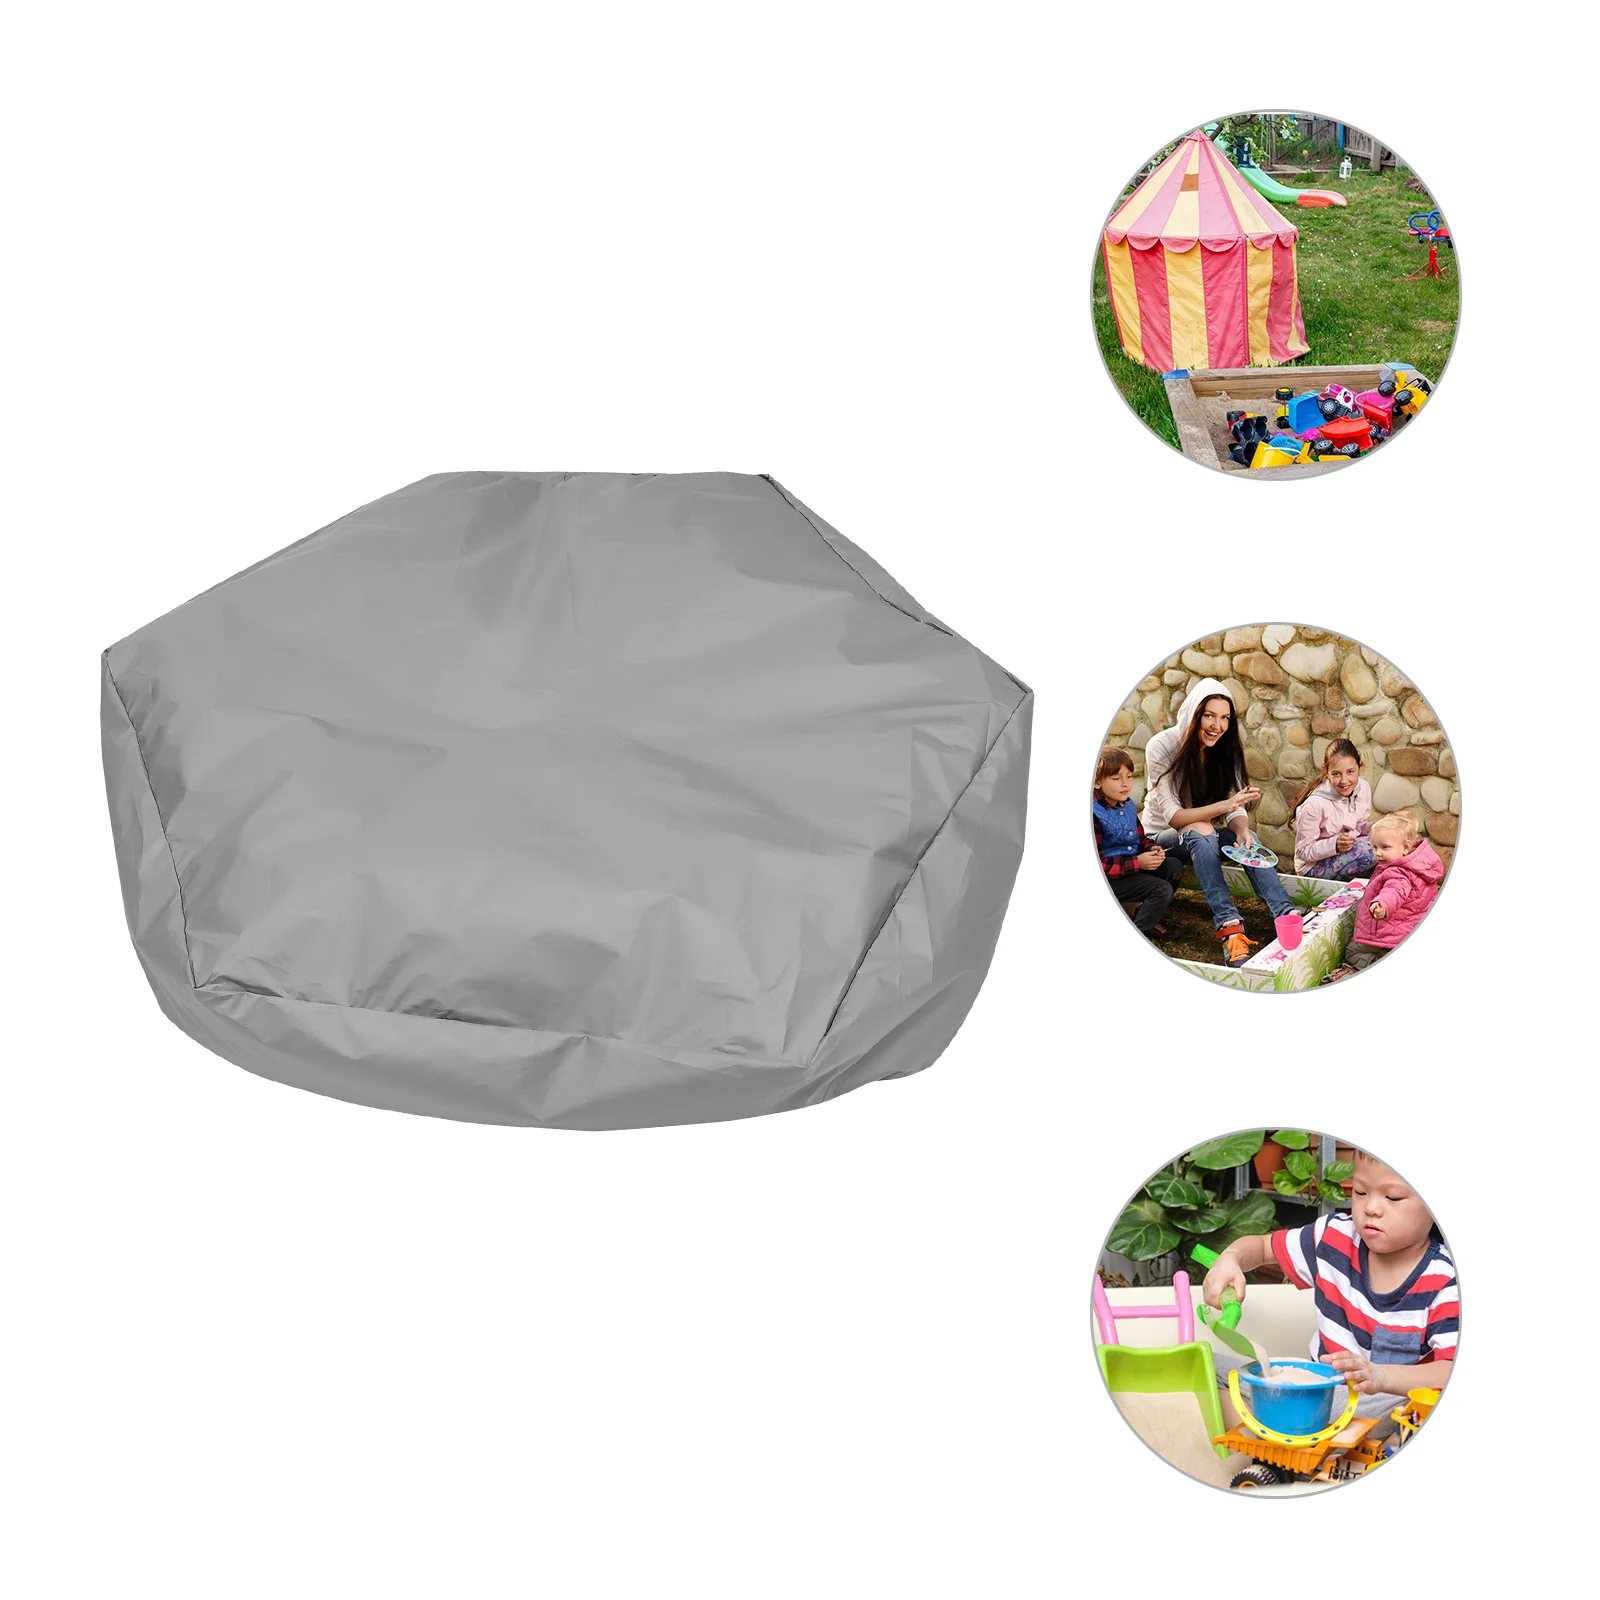 

Bunker Cover Protective Kids Swimming Pools Oxford Cloth Beach Toys Sandbox Sandpit Protector Winter